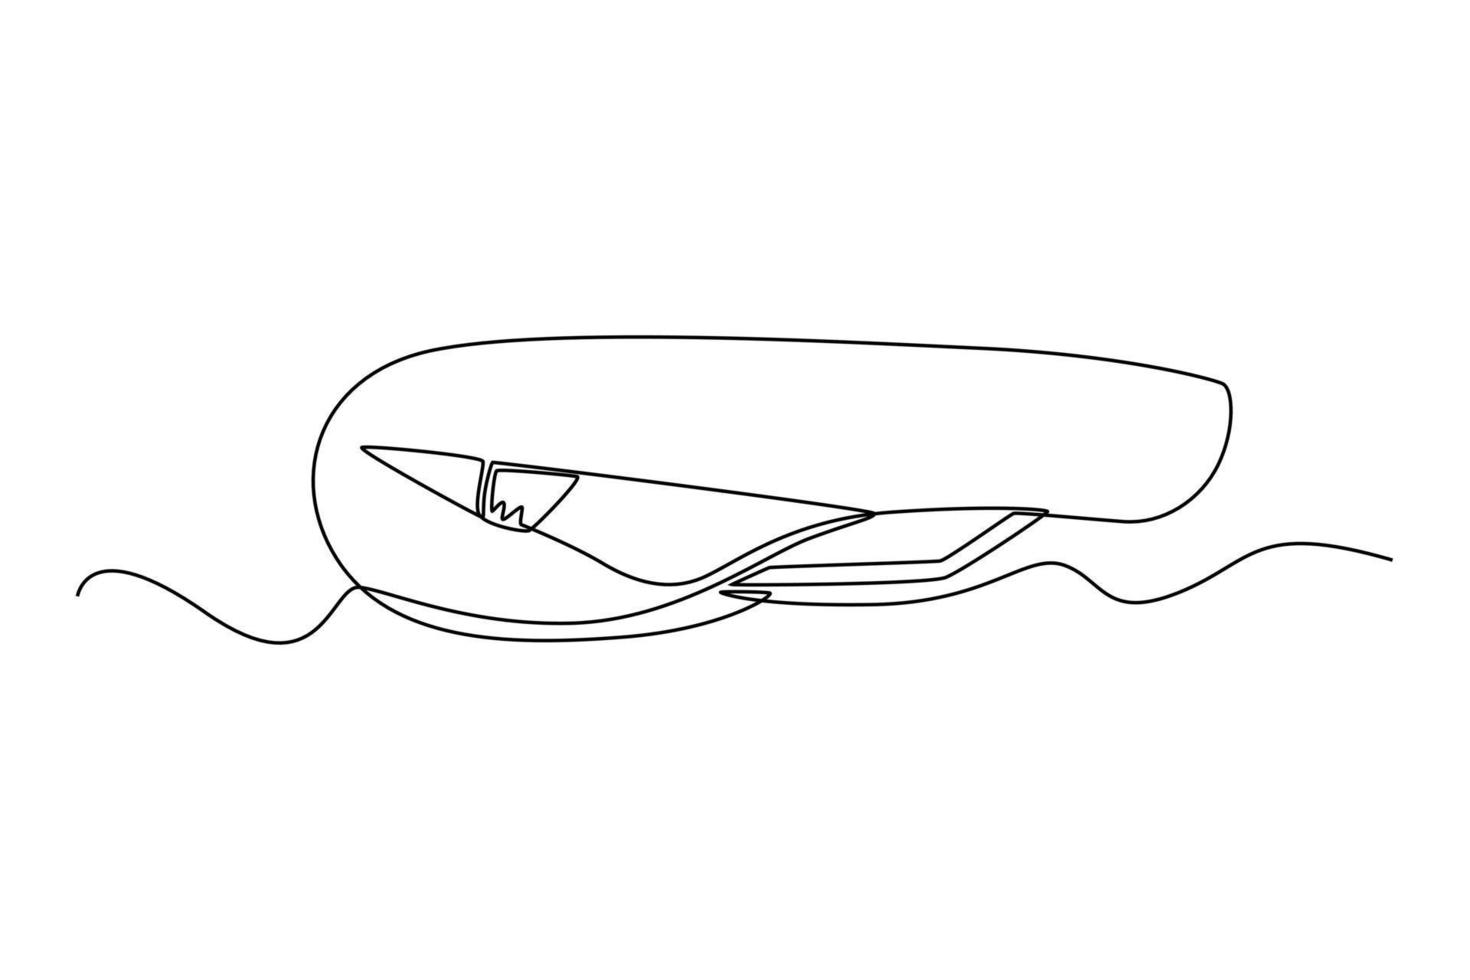 Single one line drawing bicycle seat. World bicycle day concept. Continuous line draw design graphic vector illustration.